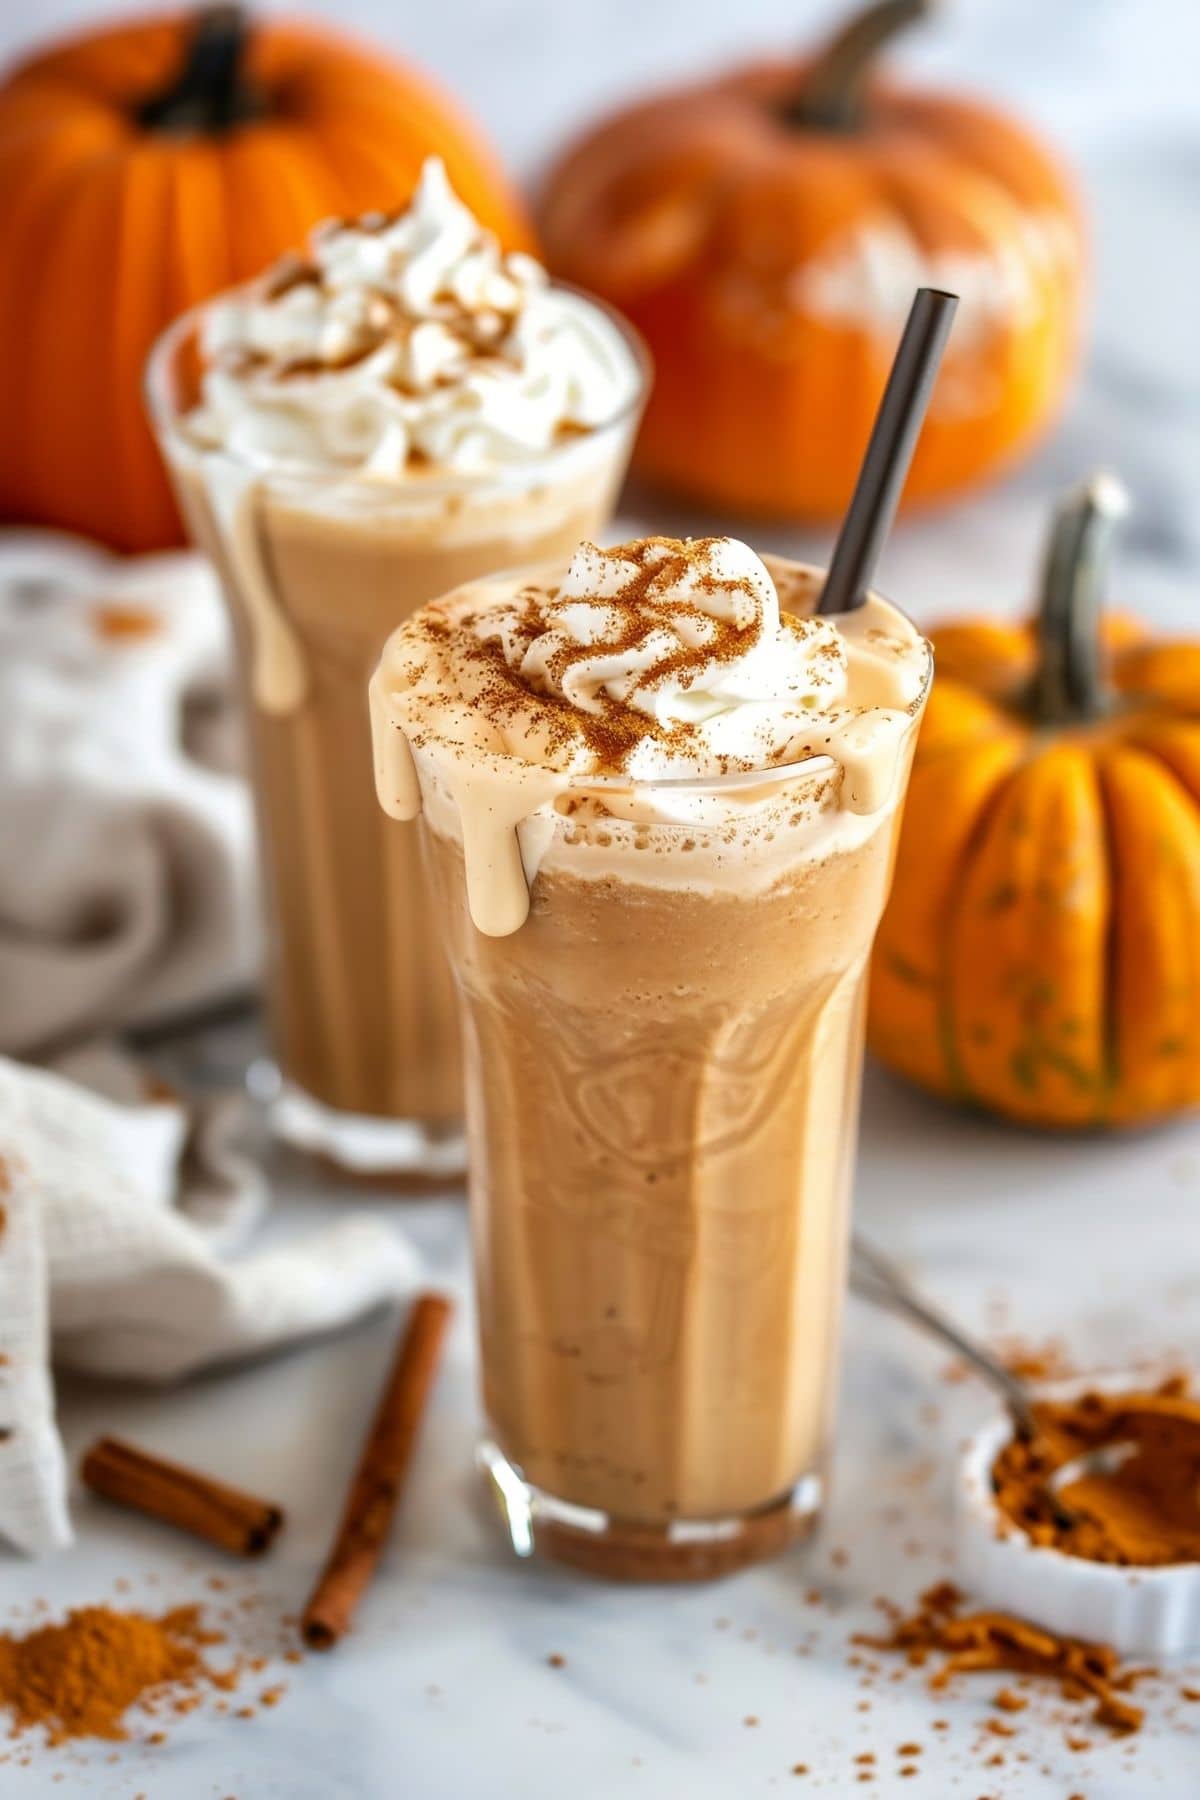 Two Pumpkin Milkshakes in Tall Glasses with Whipped Cream and Cinnamon on a White Marble Table Decorated with Pumpkins and Cinnamon Sticks